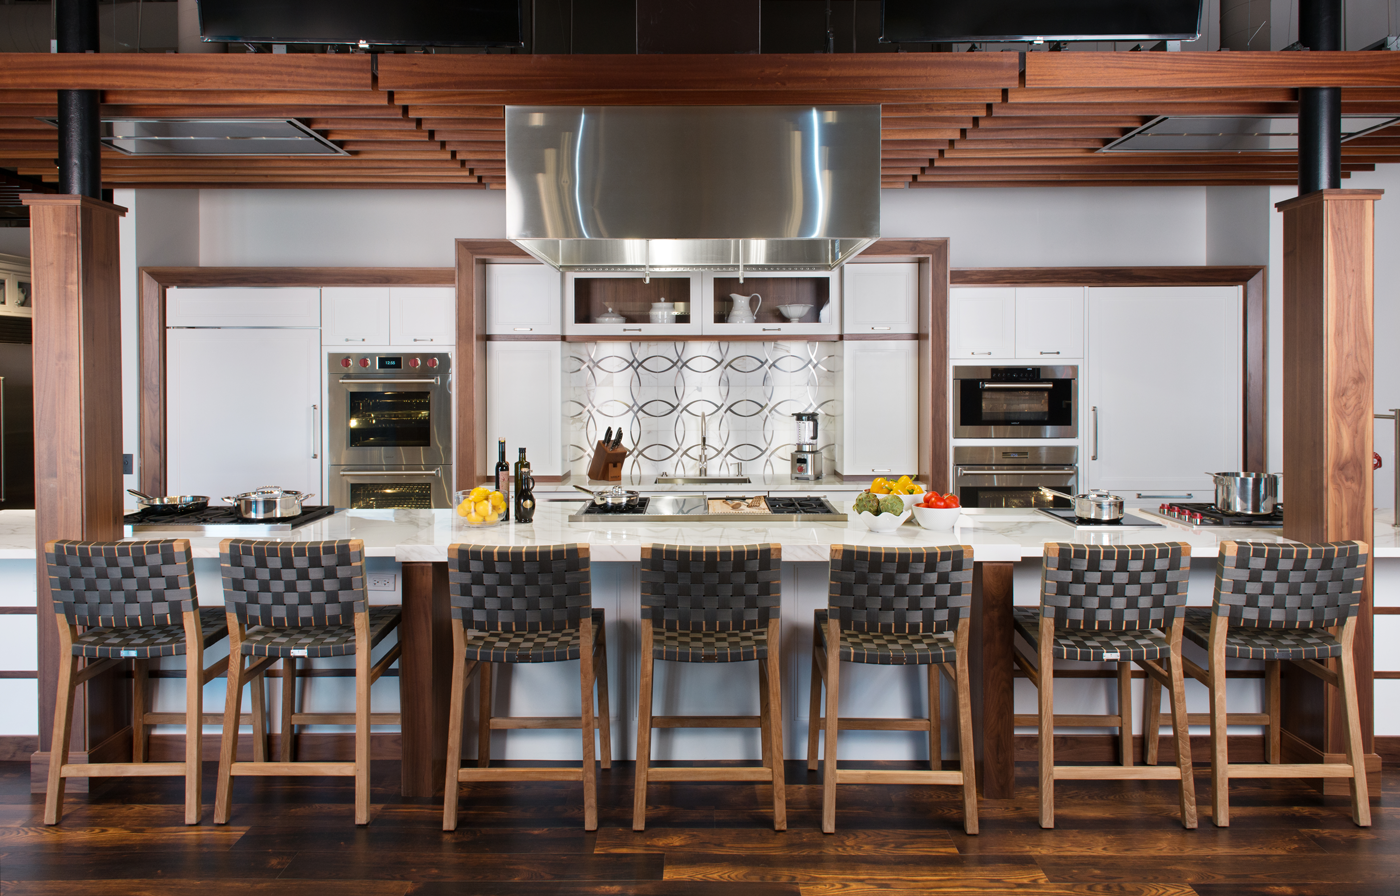 Clarke showroom kitchen with long island set up with seven stools